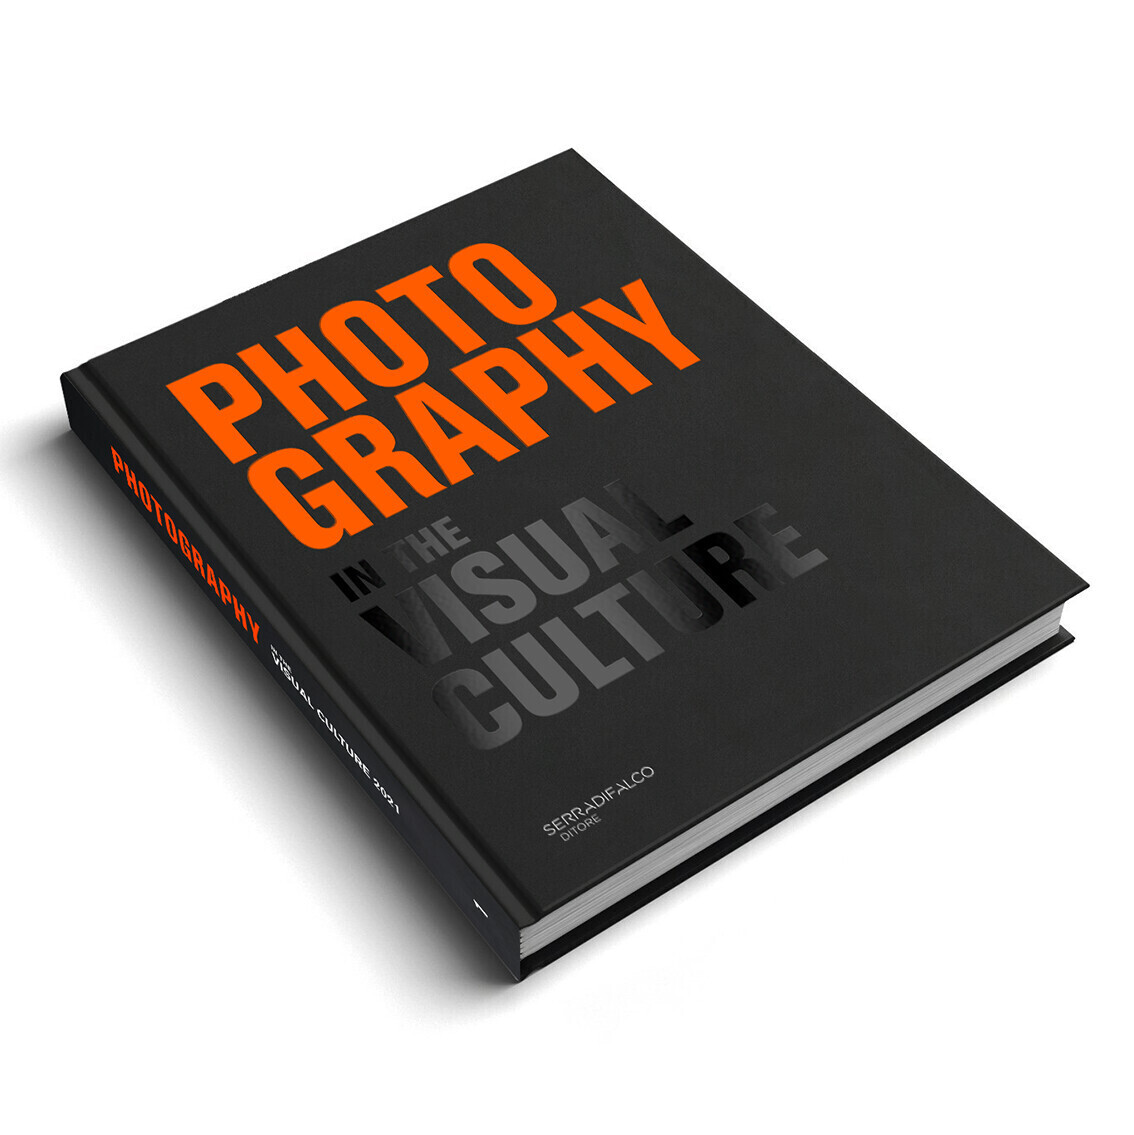 Photography in the Visual Culture Volume 1